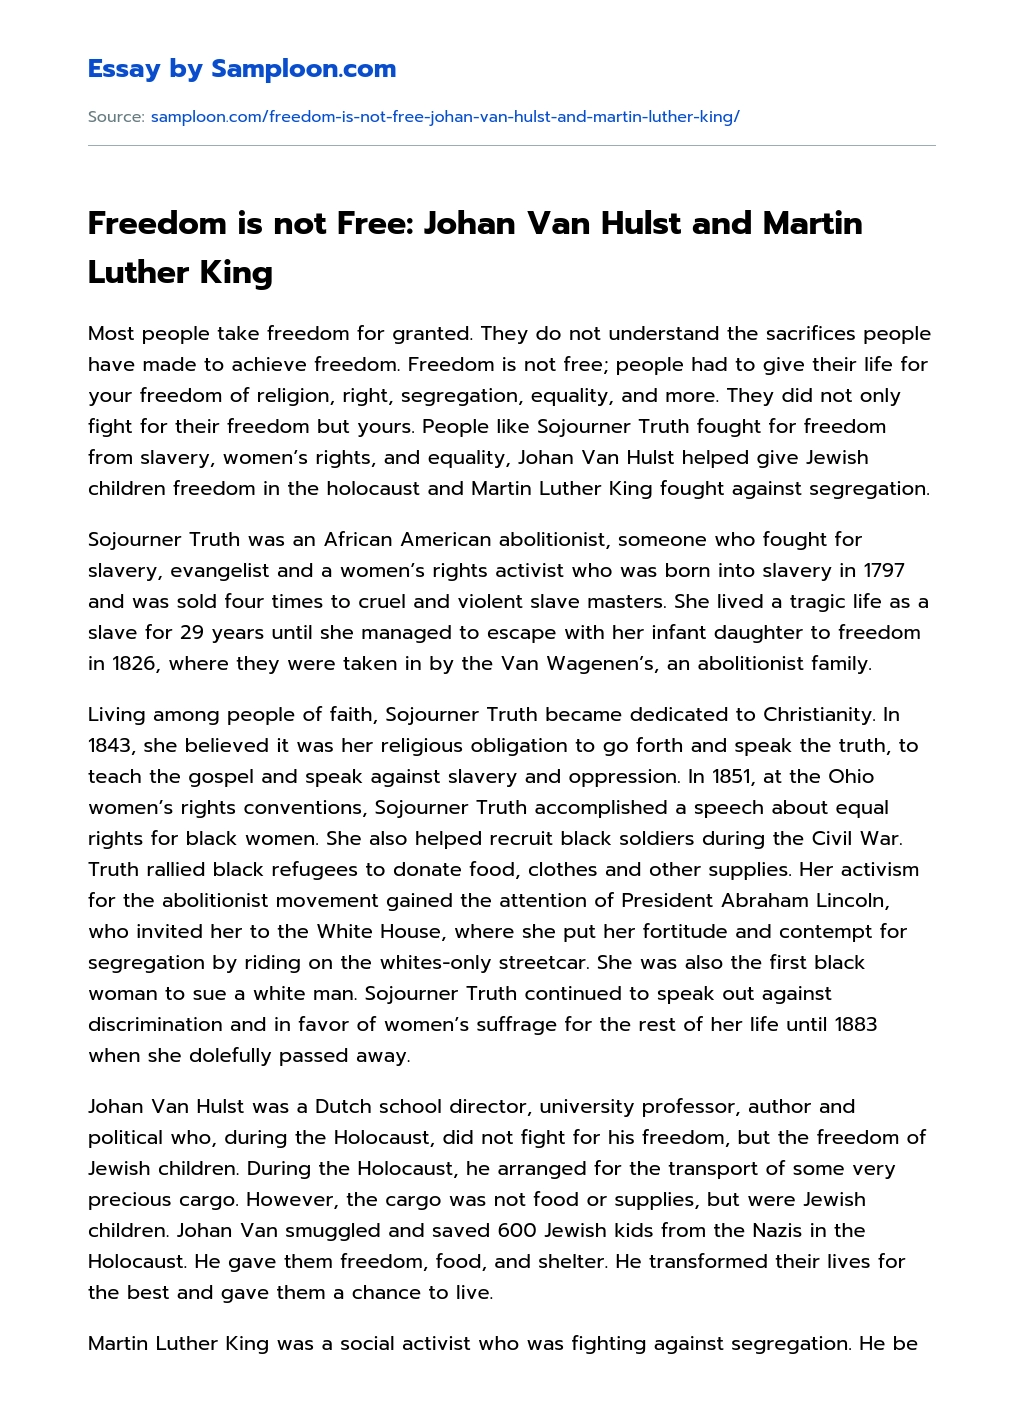 Freedom is not Free: Johan Van Hulst and Martin Luther King essay